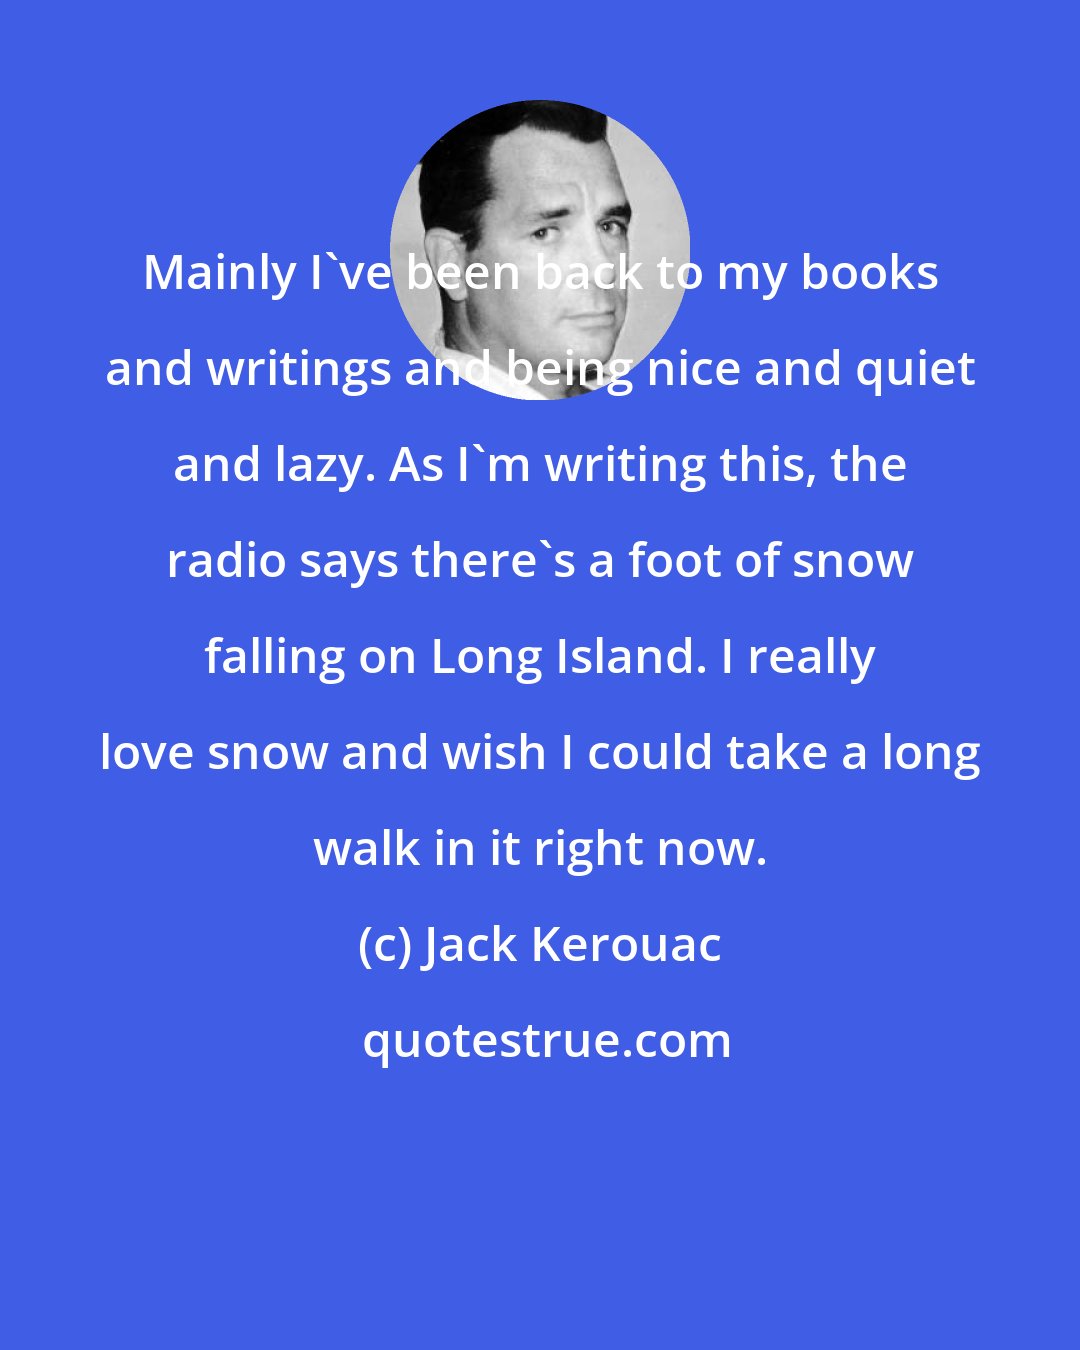 Jack Kerouac: Mainly I've been back to my books and writings and being nice and quiet and lazy. As I'm writing this, the radio says there's a foot of snow falling on Long Island. I really love snow and wish I could take a long walk in it right now.